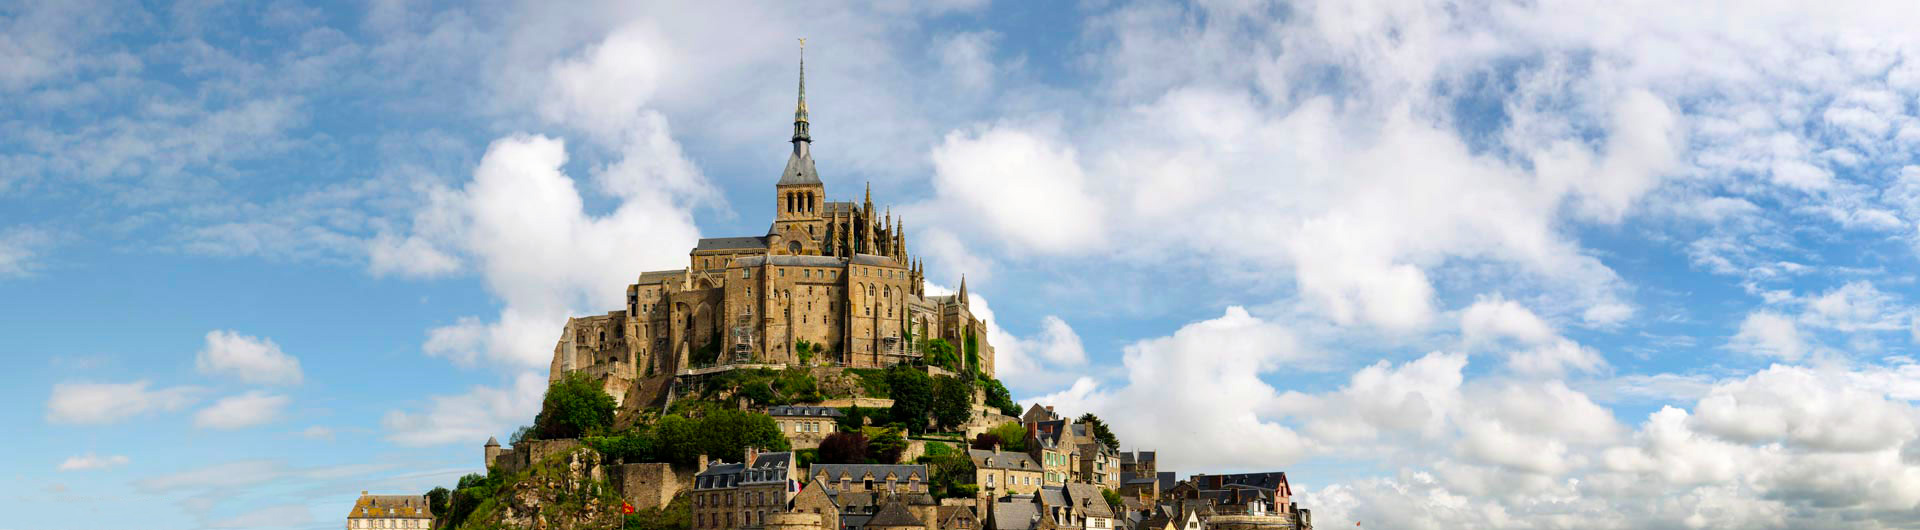 Guided tour of the Mont Saint Michel